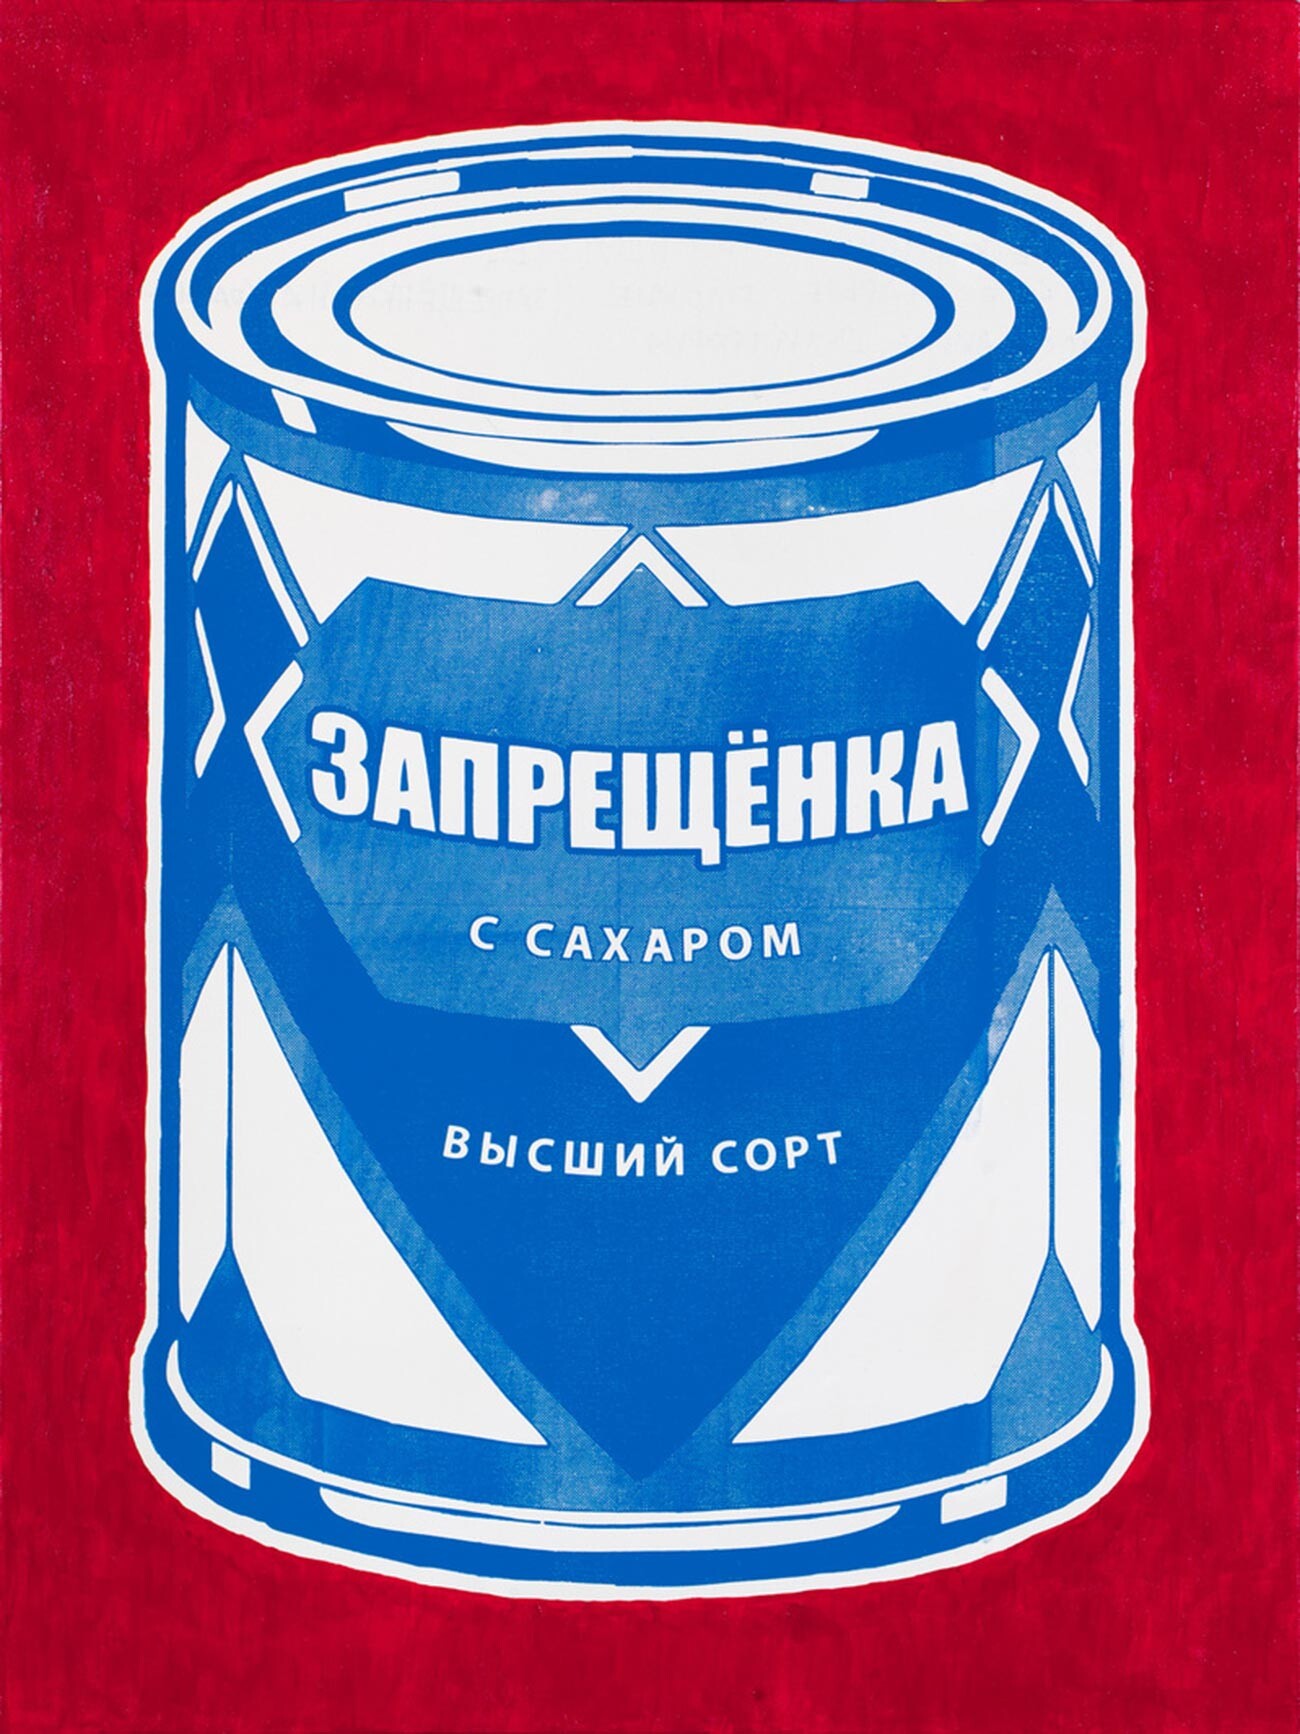 Artyom Loskutov. Prohibited goods on a red background 